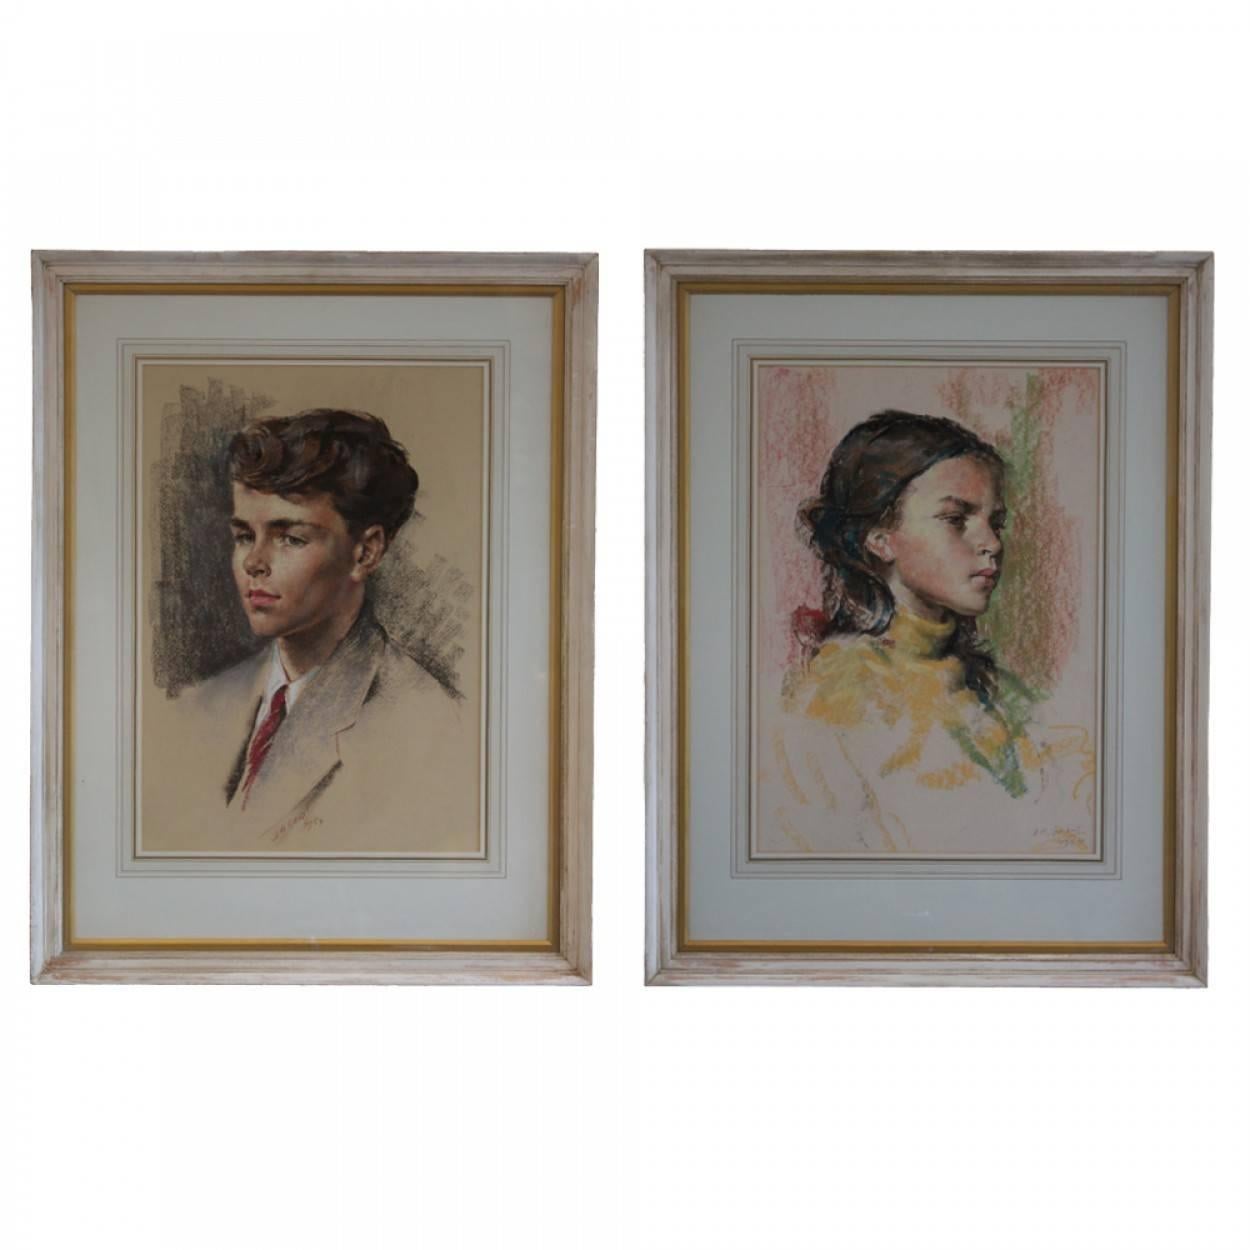 Delightful pair of pastel drawings by James Arden Grant (1887-1974), which are head and shoulder portraits of a boy and a girl, signed and dated 1954.

They are attractively mounted and framed in quality painted wooden frames.

The pictures measure